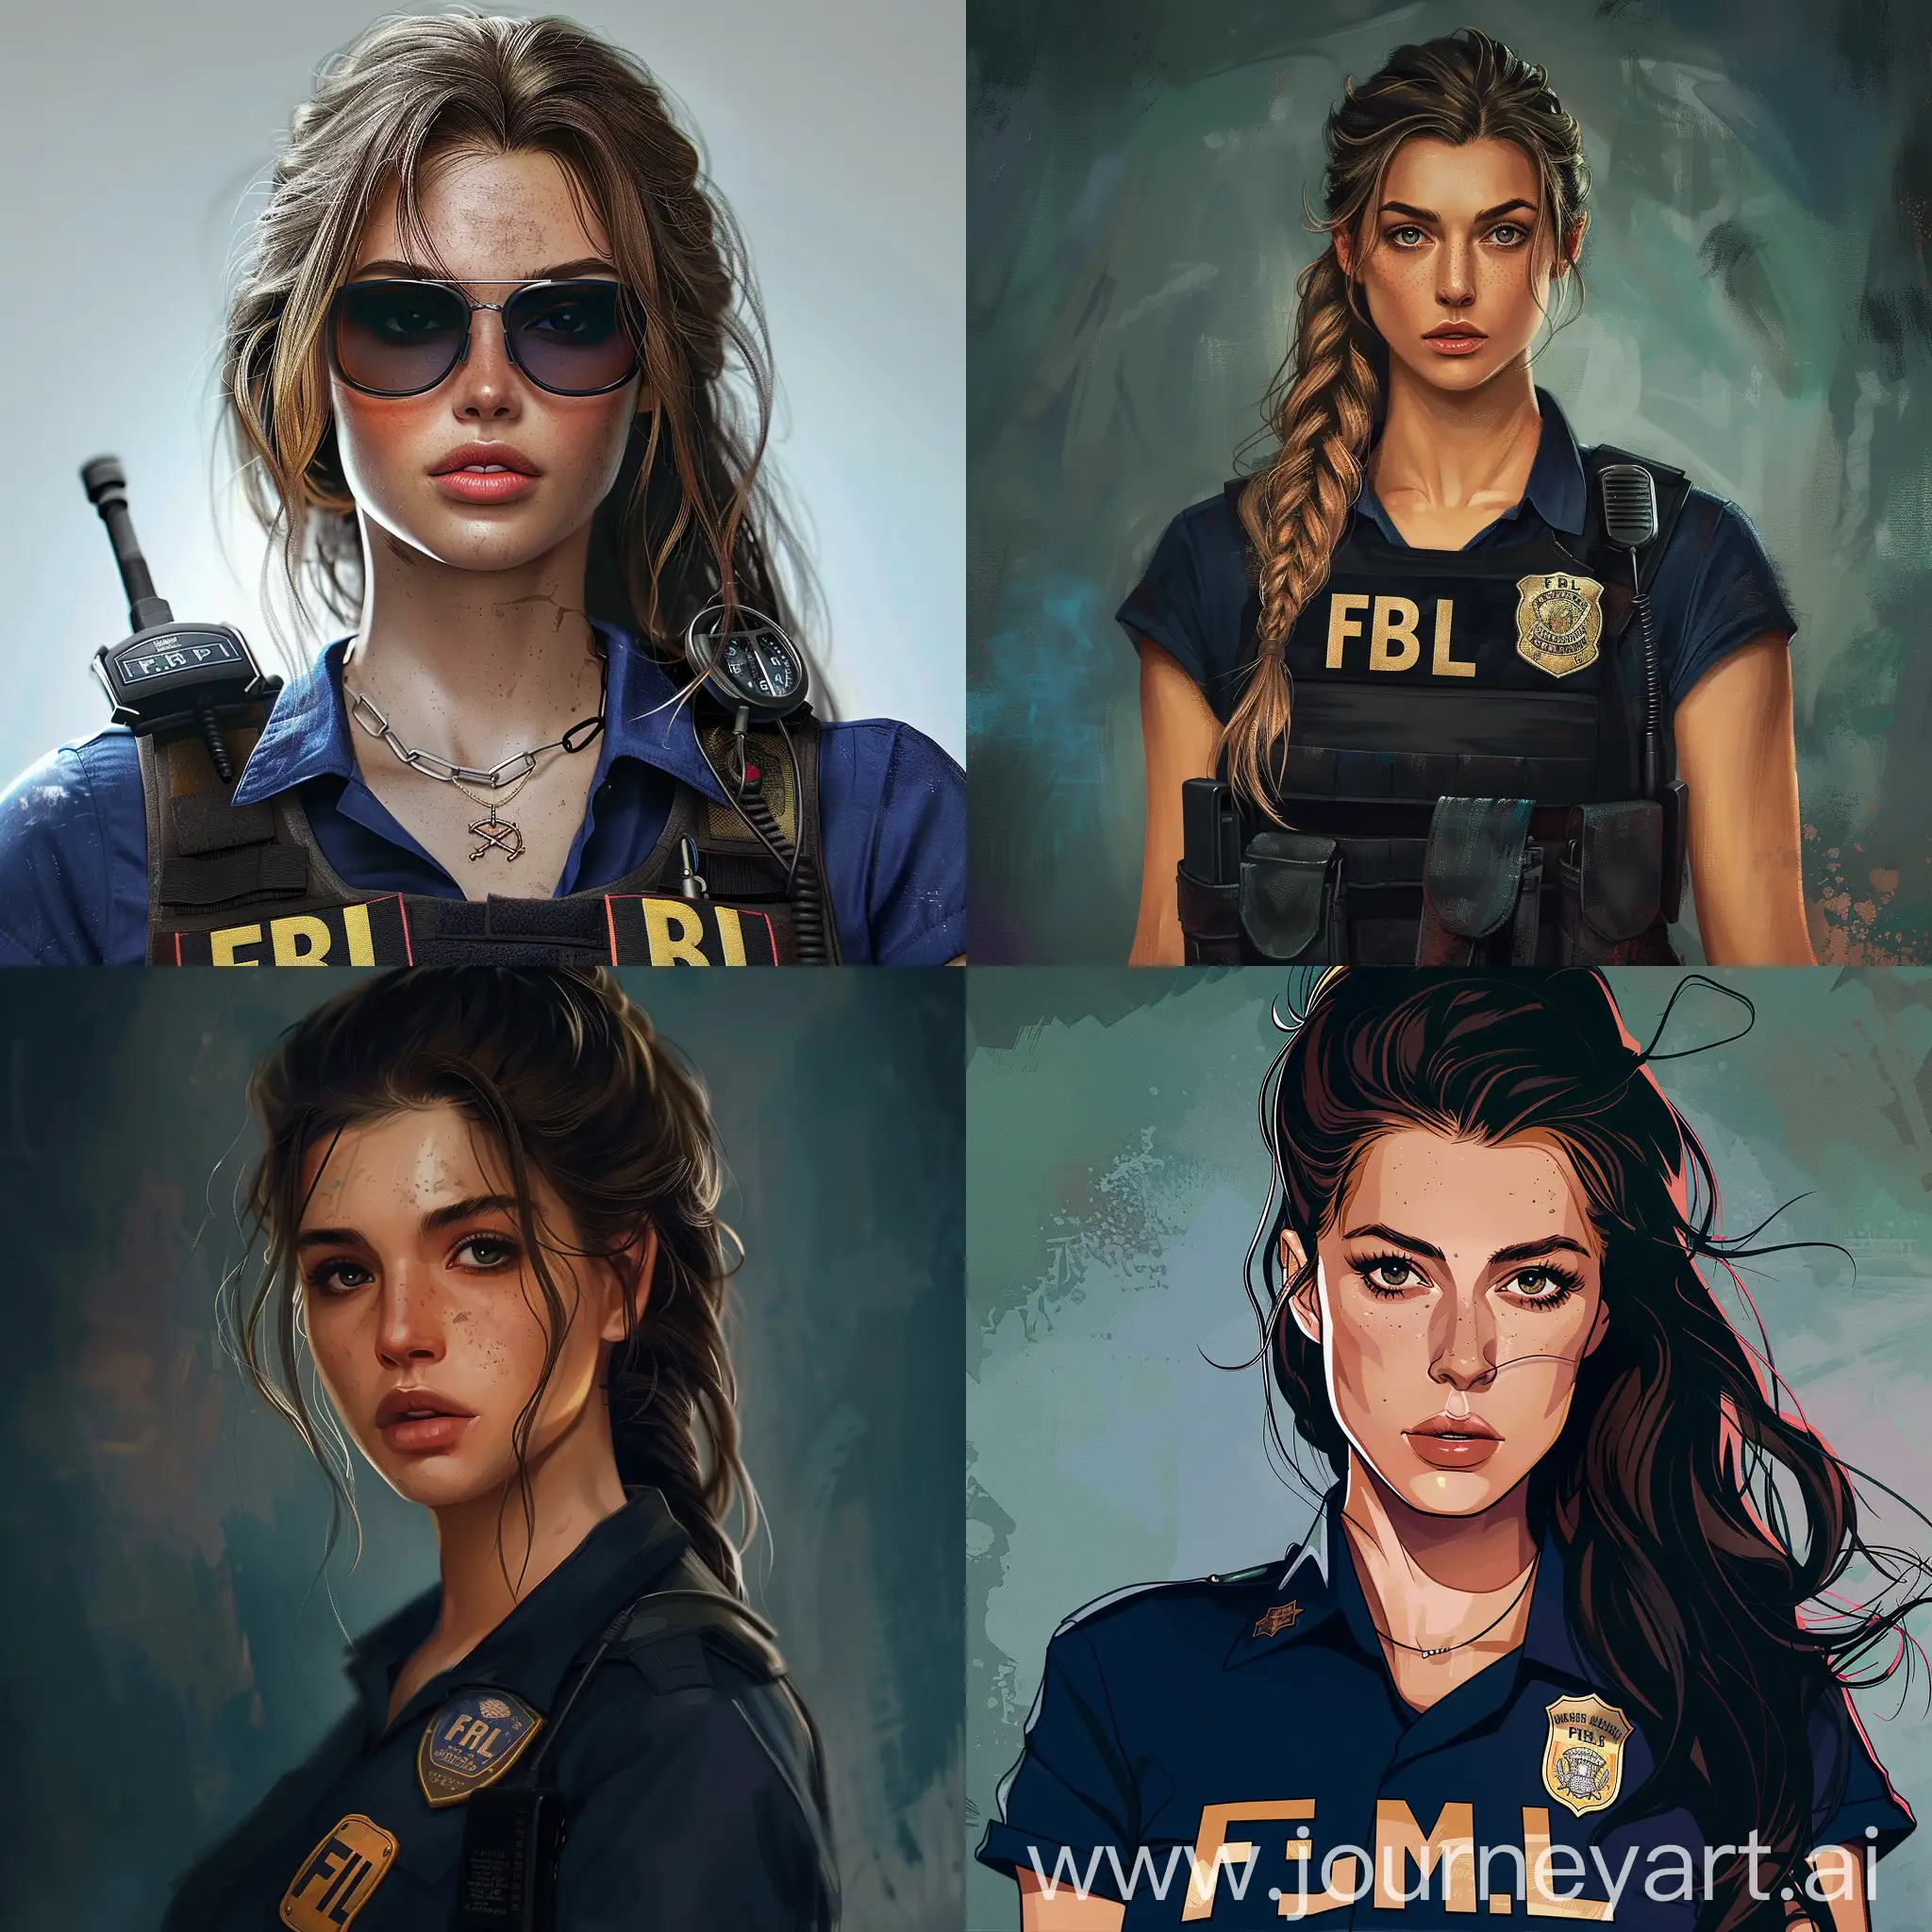 FBI-Girl-in-Action-Undercover-Operation-with-Gun